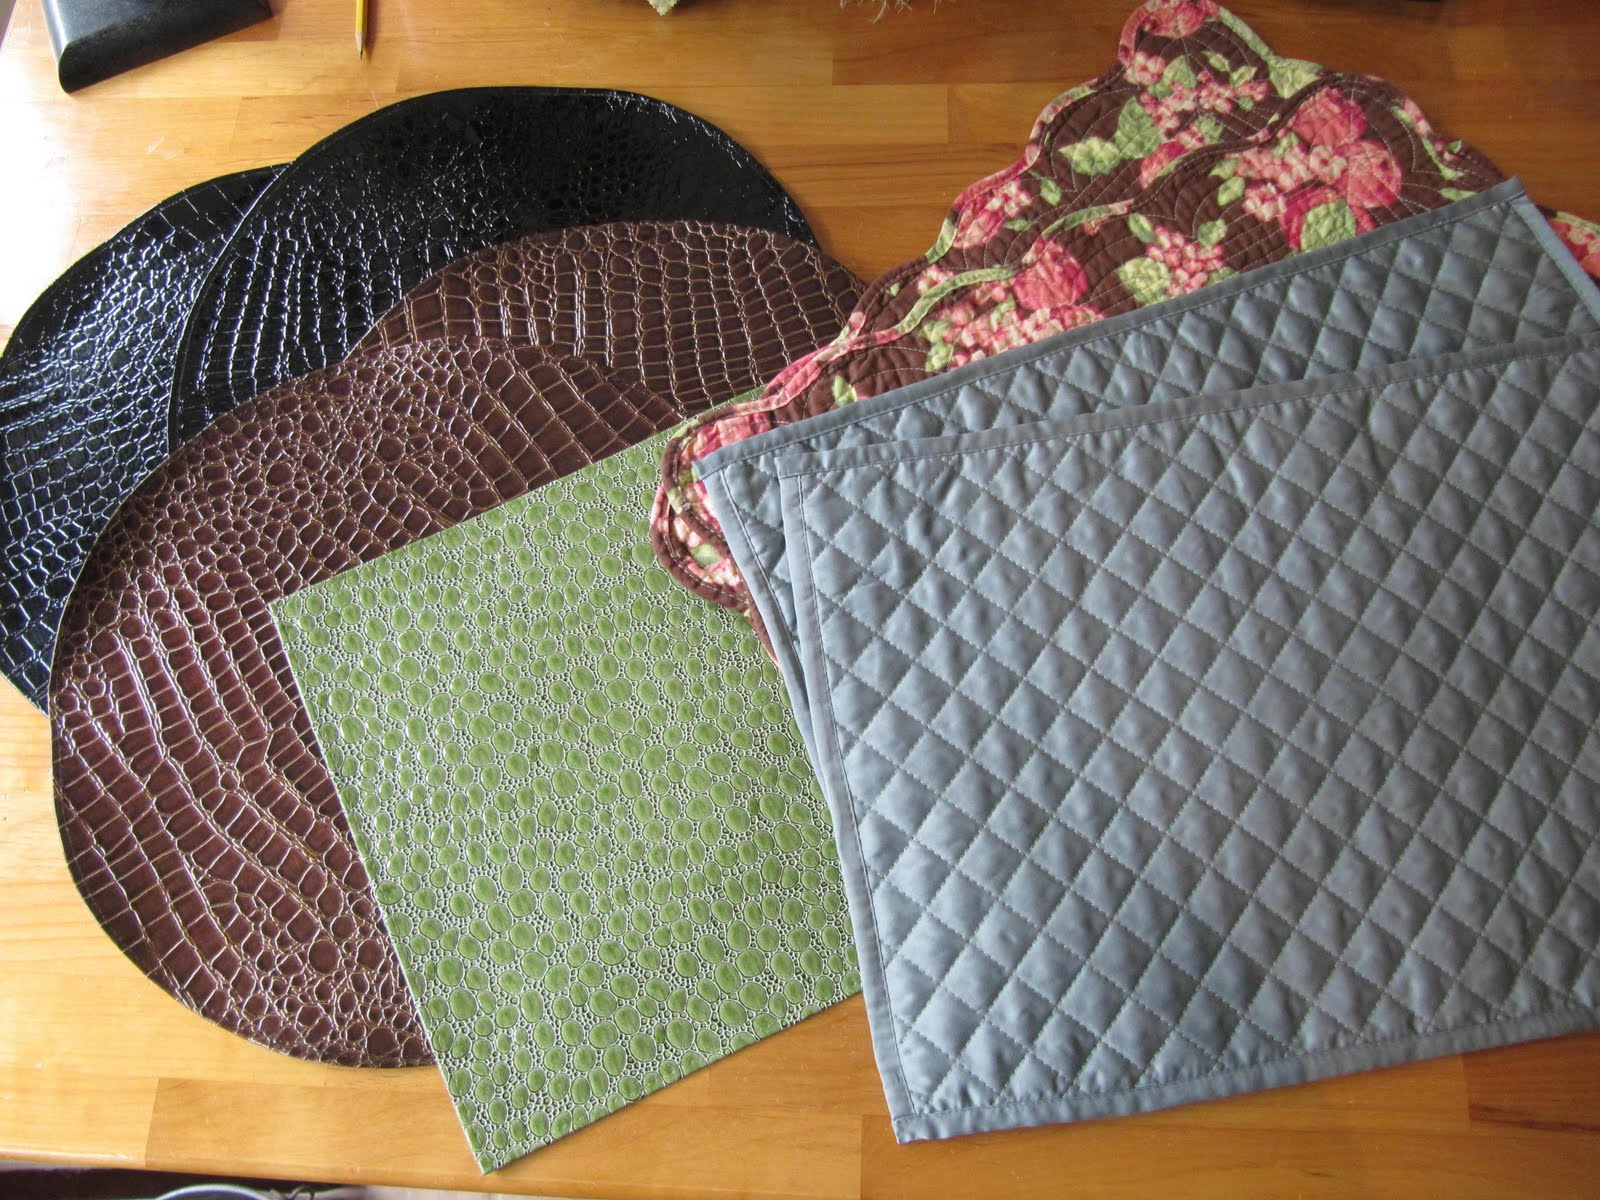 Sew Many Ways: Tool Time TuesdayPlace Mat Purse